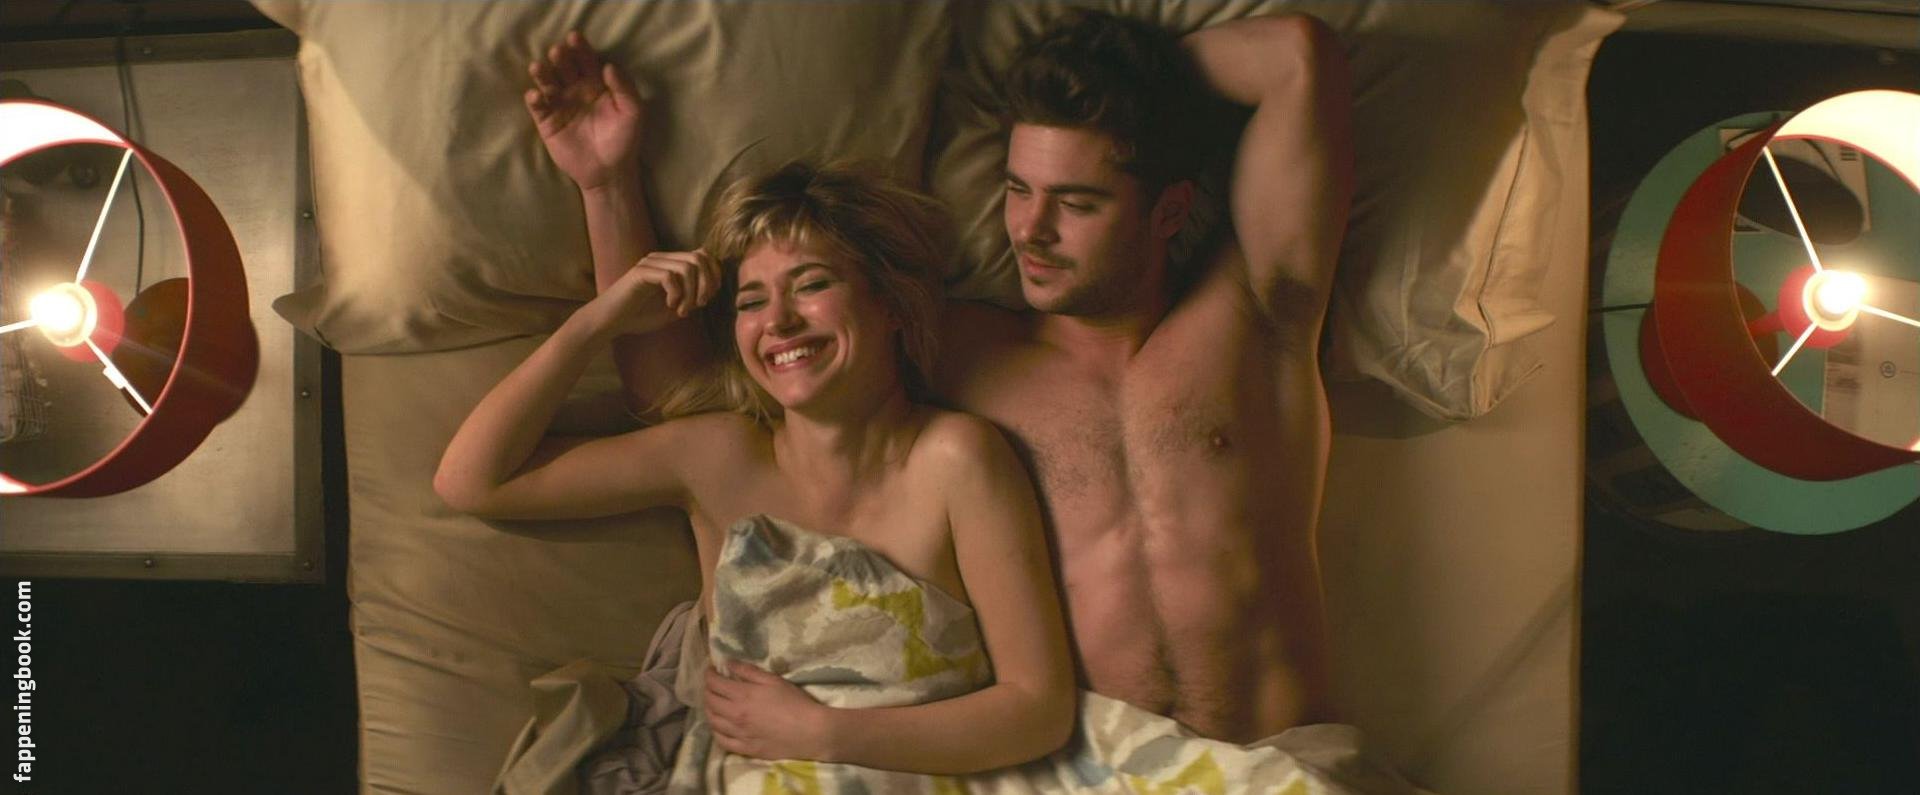 Imogen poots naked